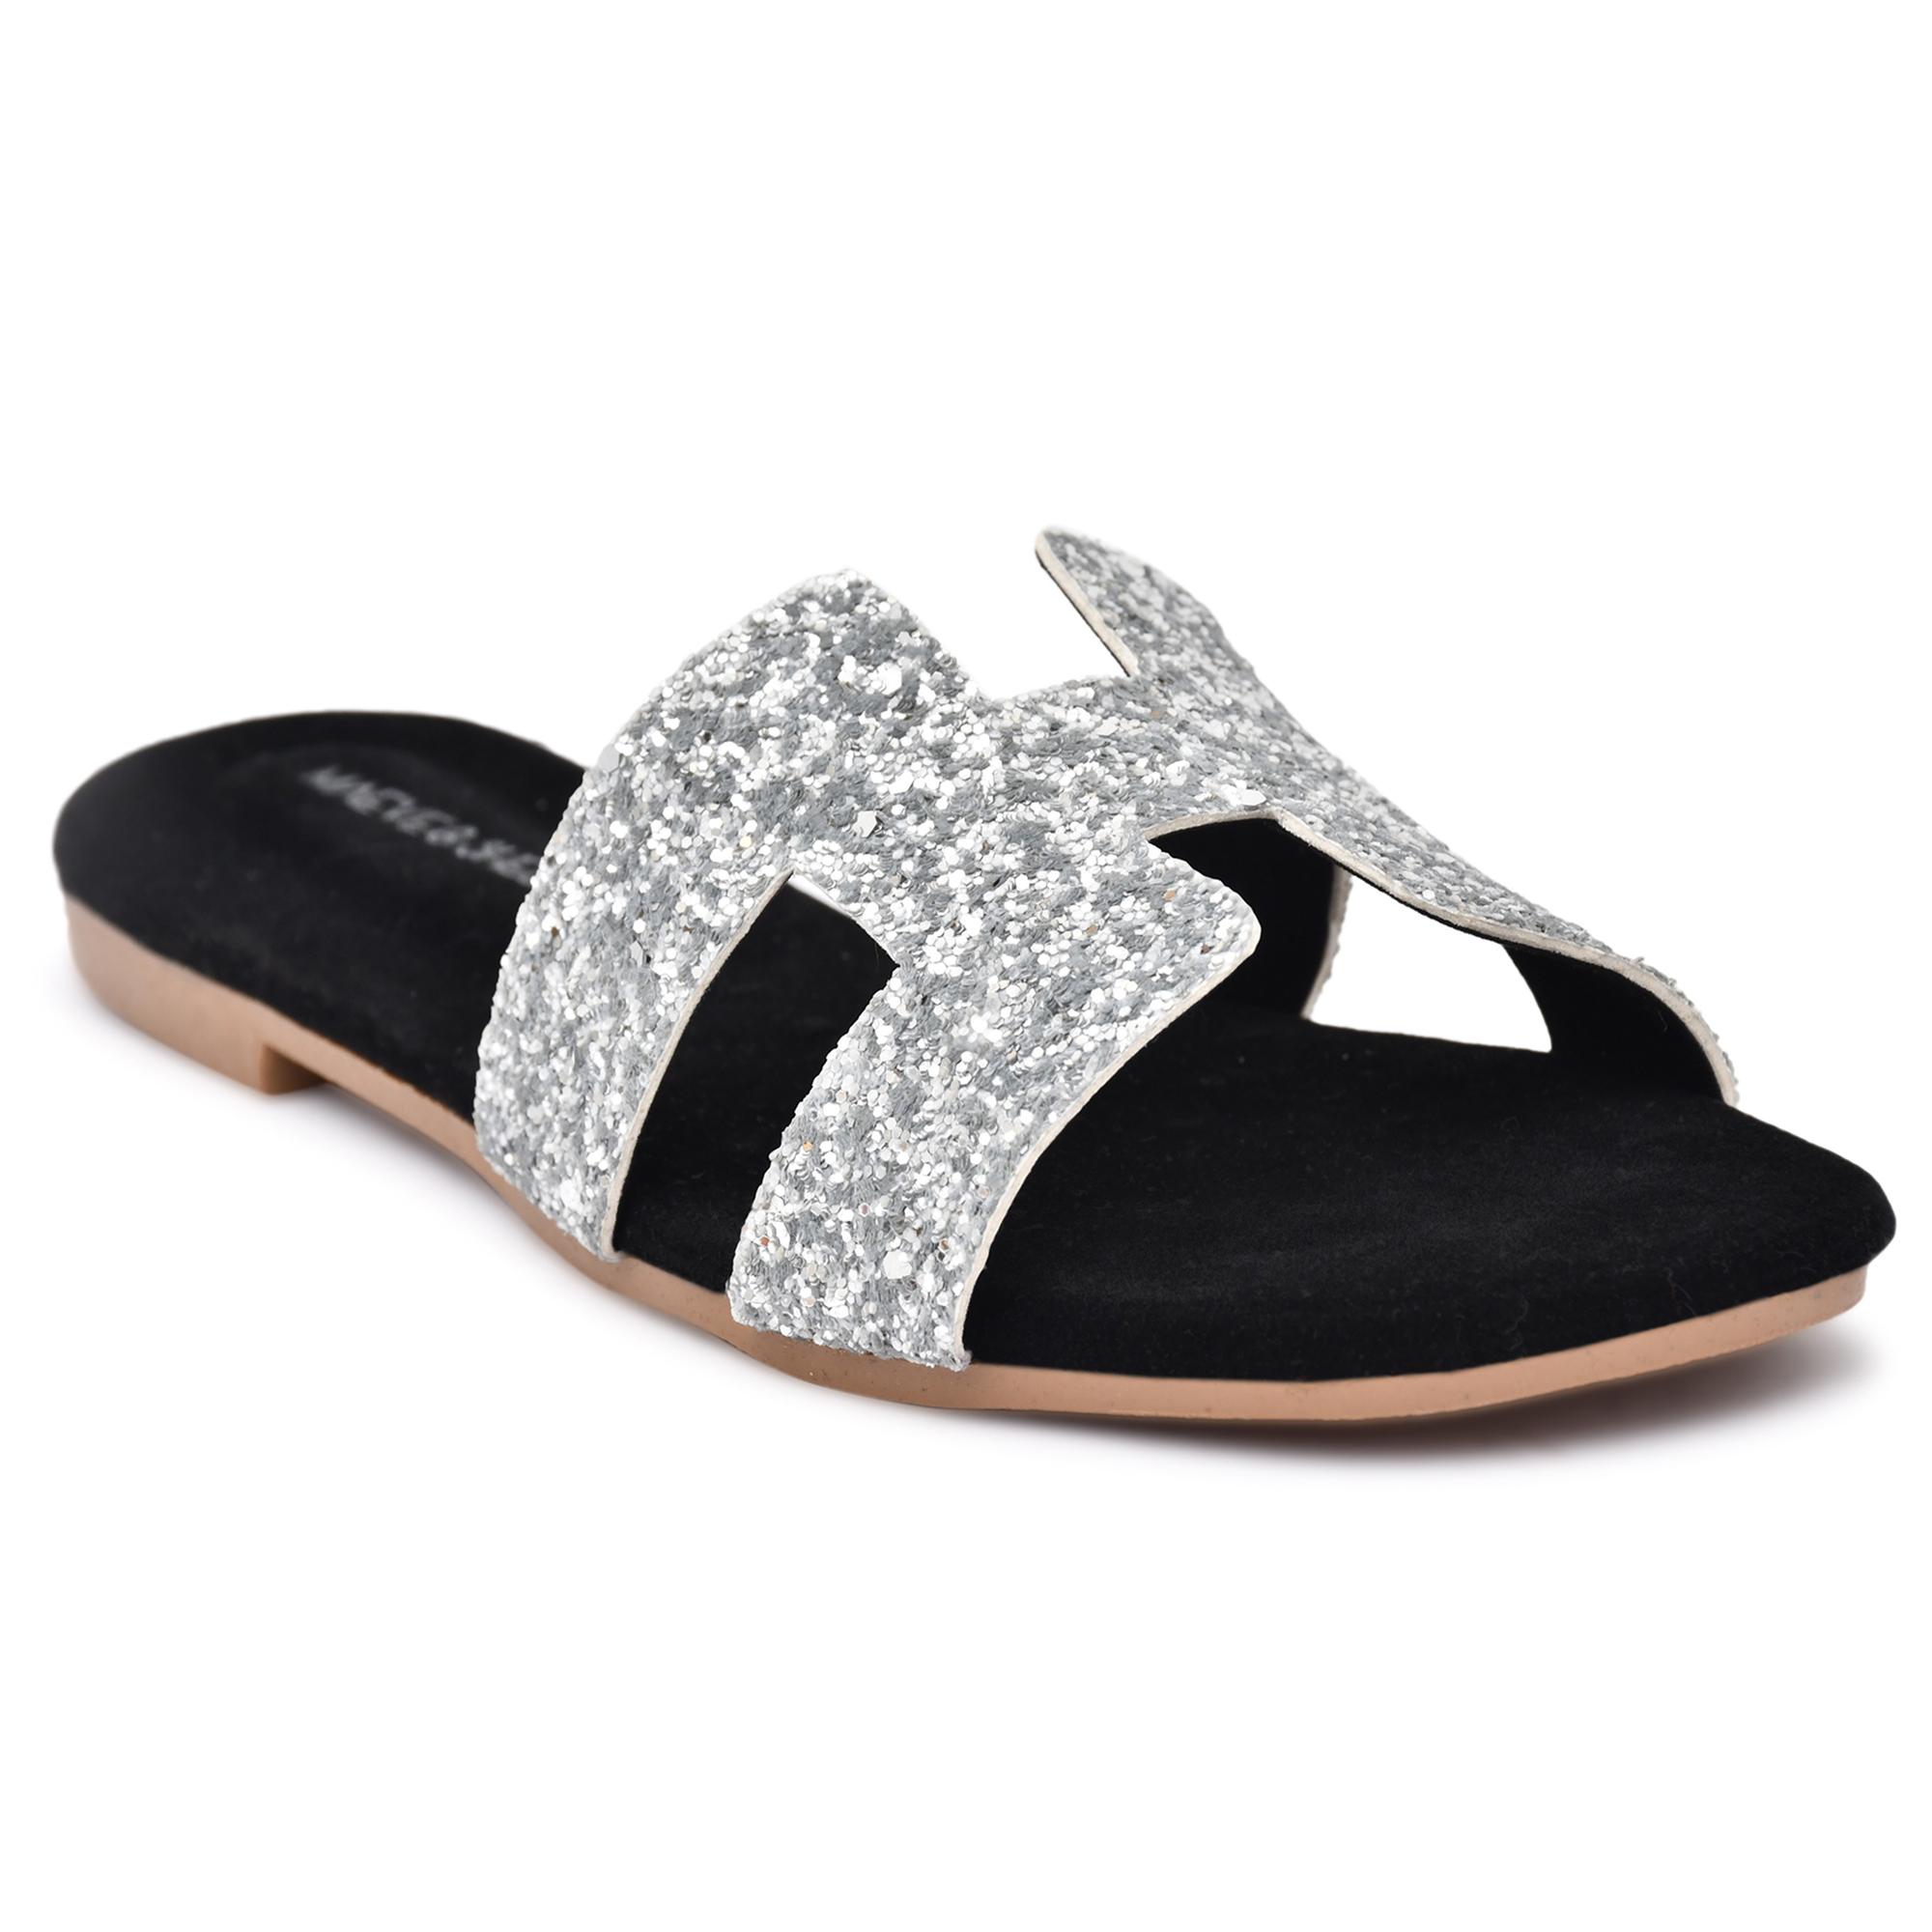 MAEVE AND SHELBY WOMEN STYLISH SILVER FLATS FOR OCCASION AND CASUAL WEAR